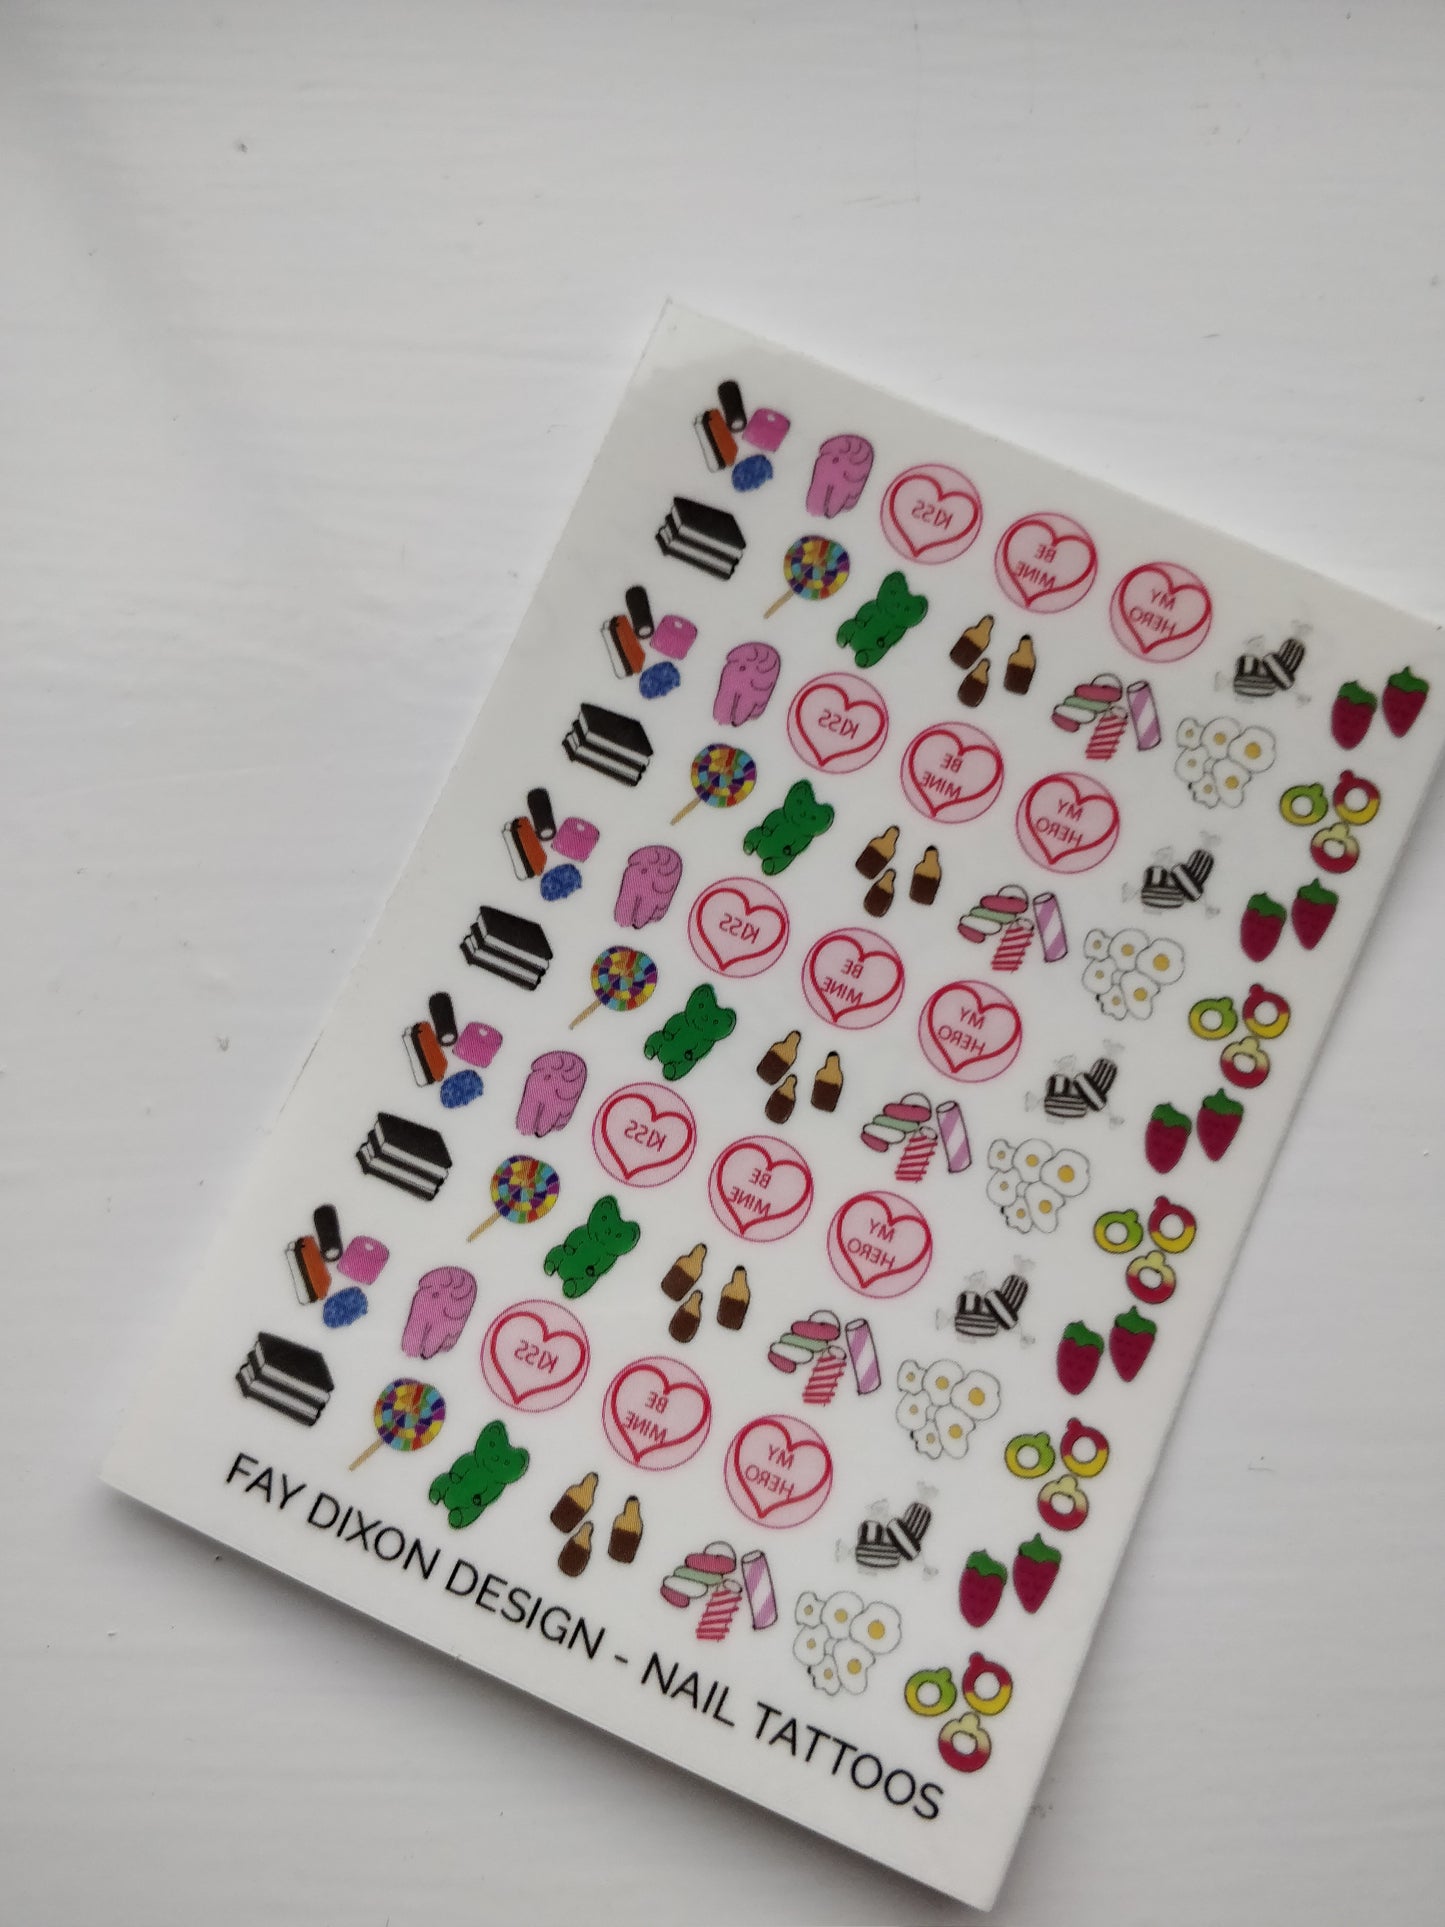 Sweets and Candy Nail Tattoos - fay-dixon-design